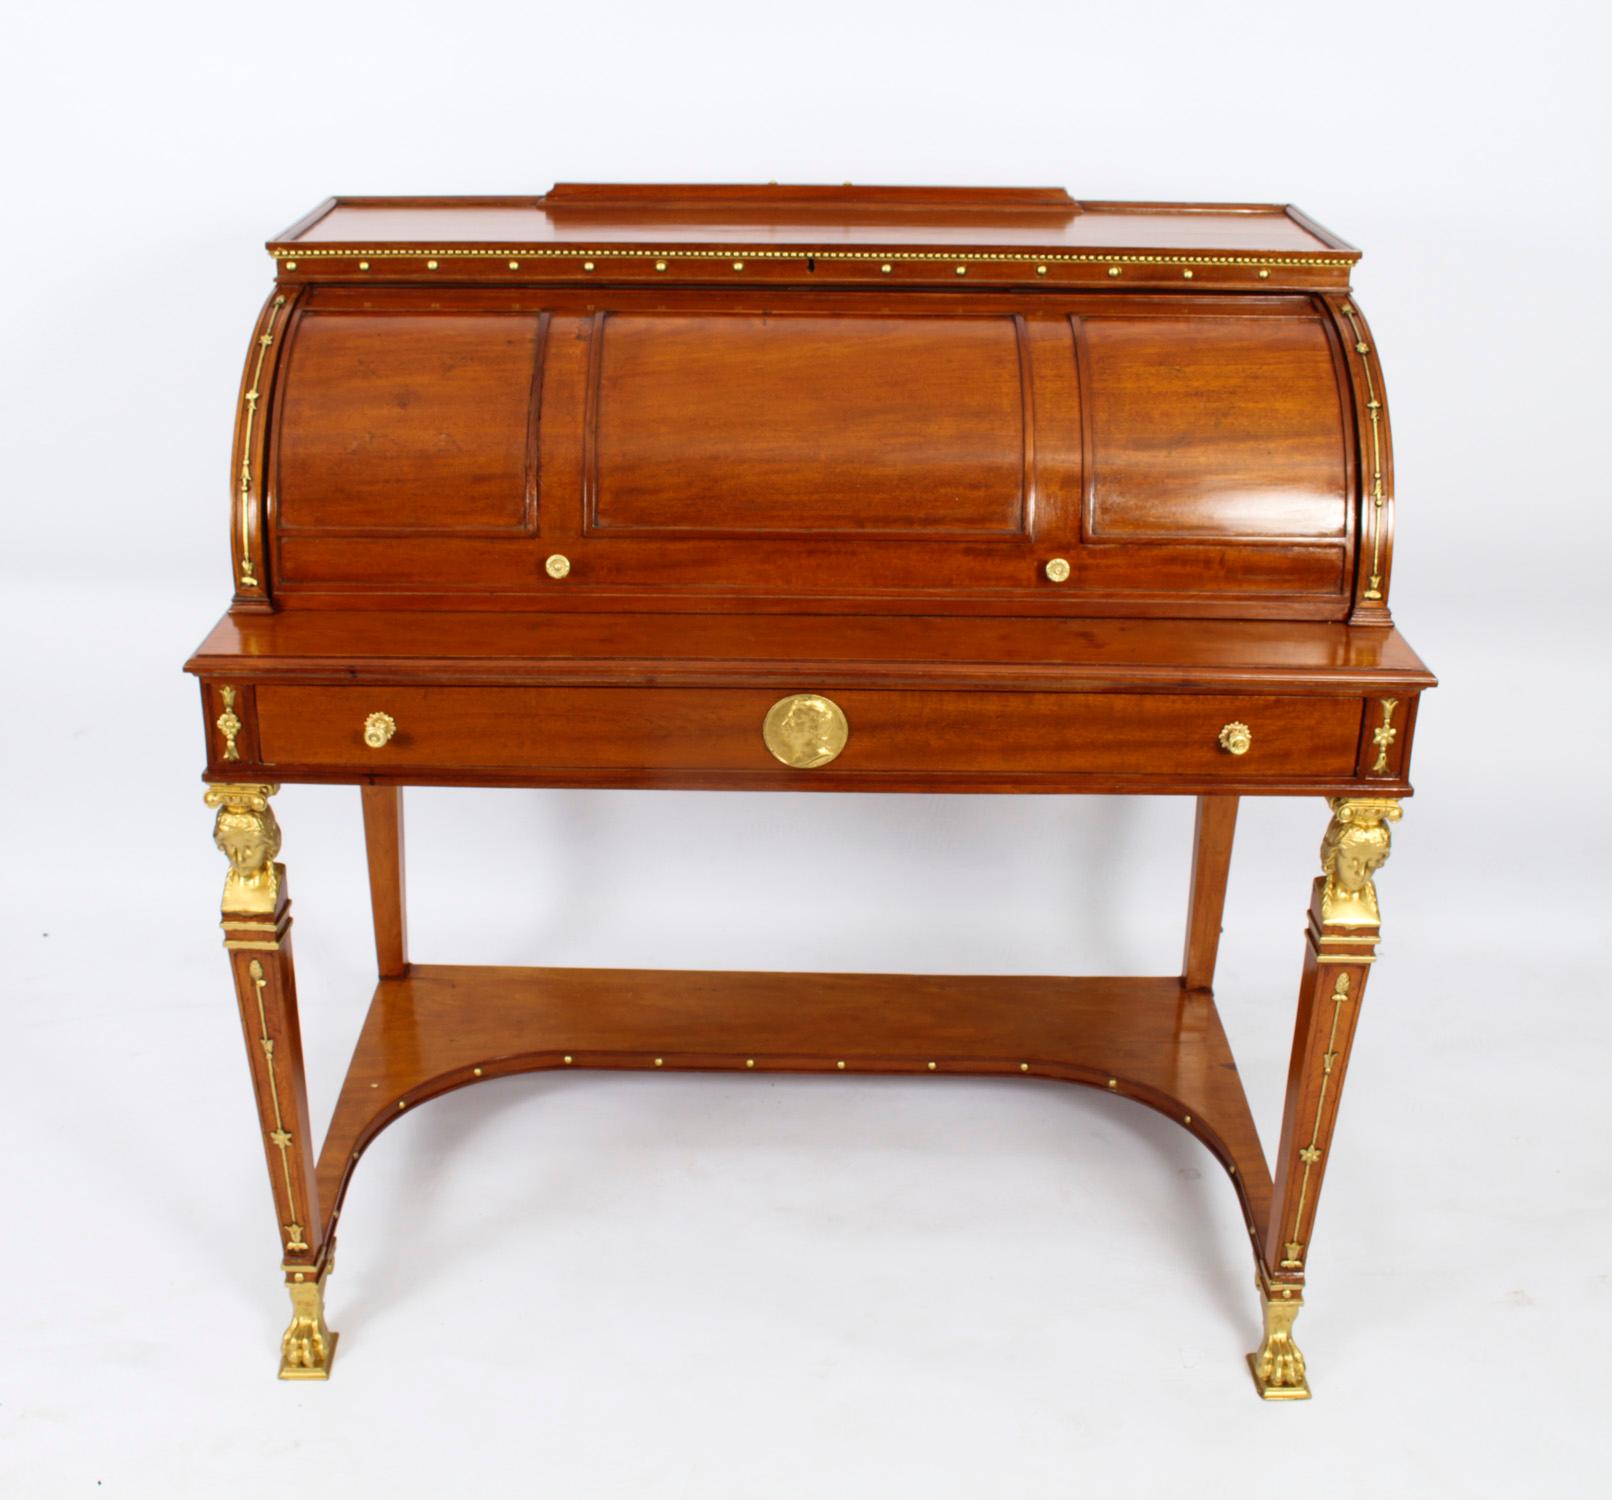 Antique French Empire Revival Cylinder Bureau, 19th Century In Good Condition For Sale In London, GB